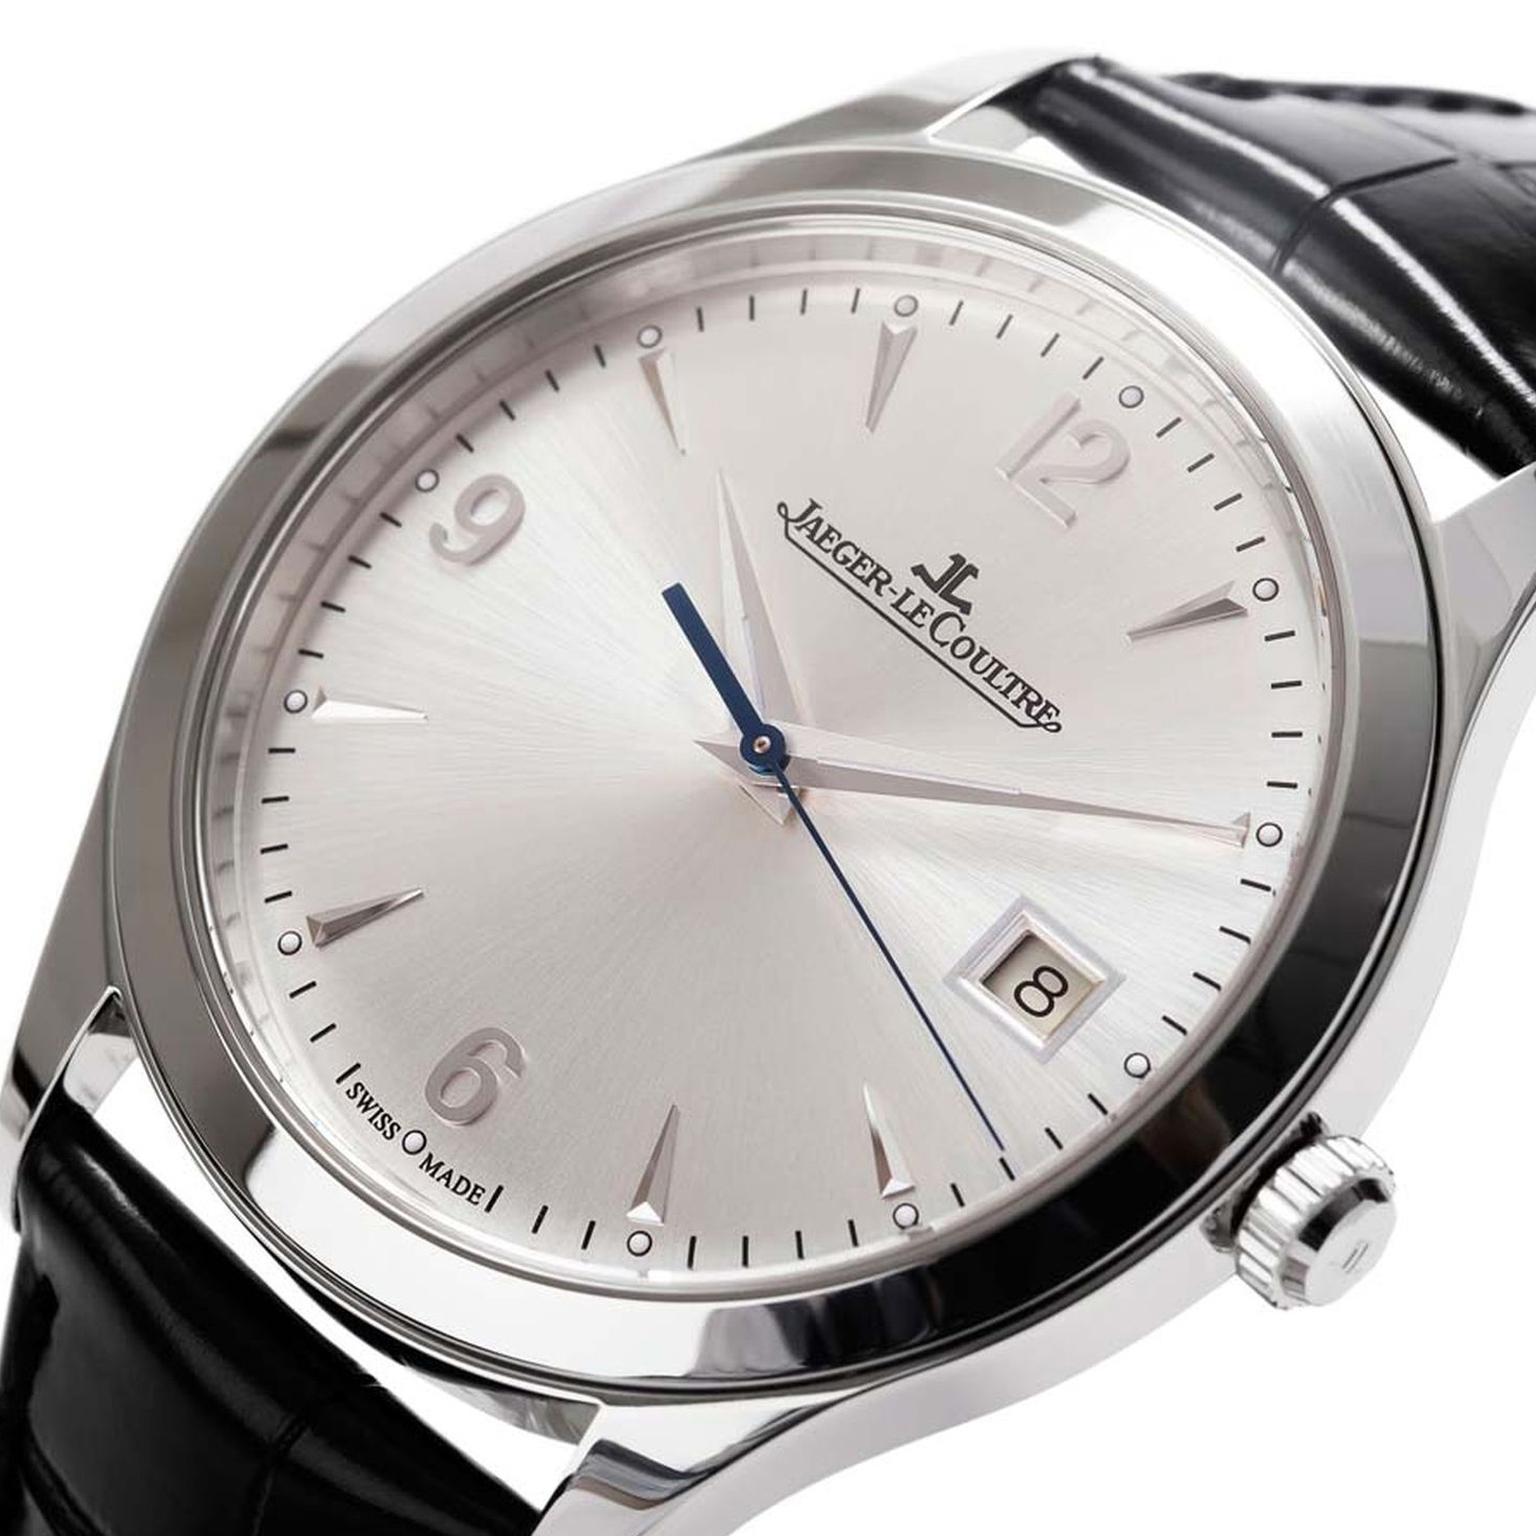 Jaeger-LeCoultre Master Control watch features pure lines and a sober dial, which includes a date window at 3 o'clock (£4,900).